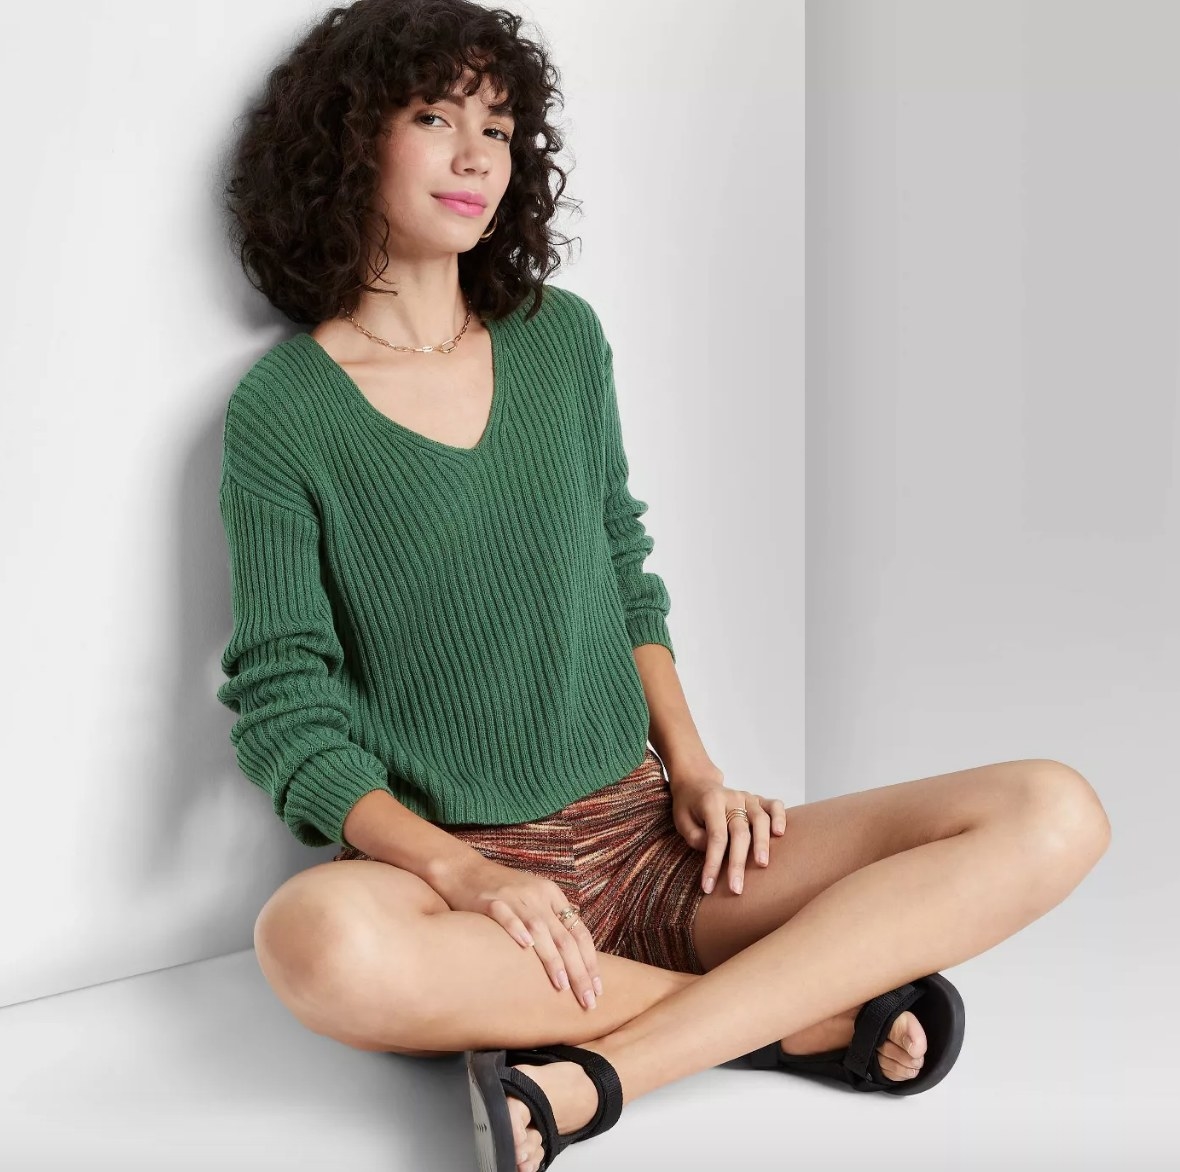 Model wearing green knit sweater with brown shorts